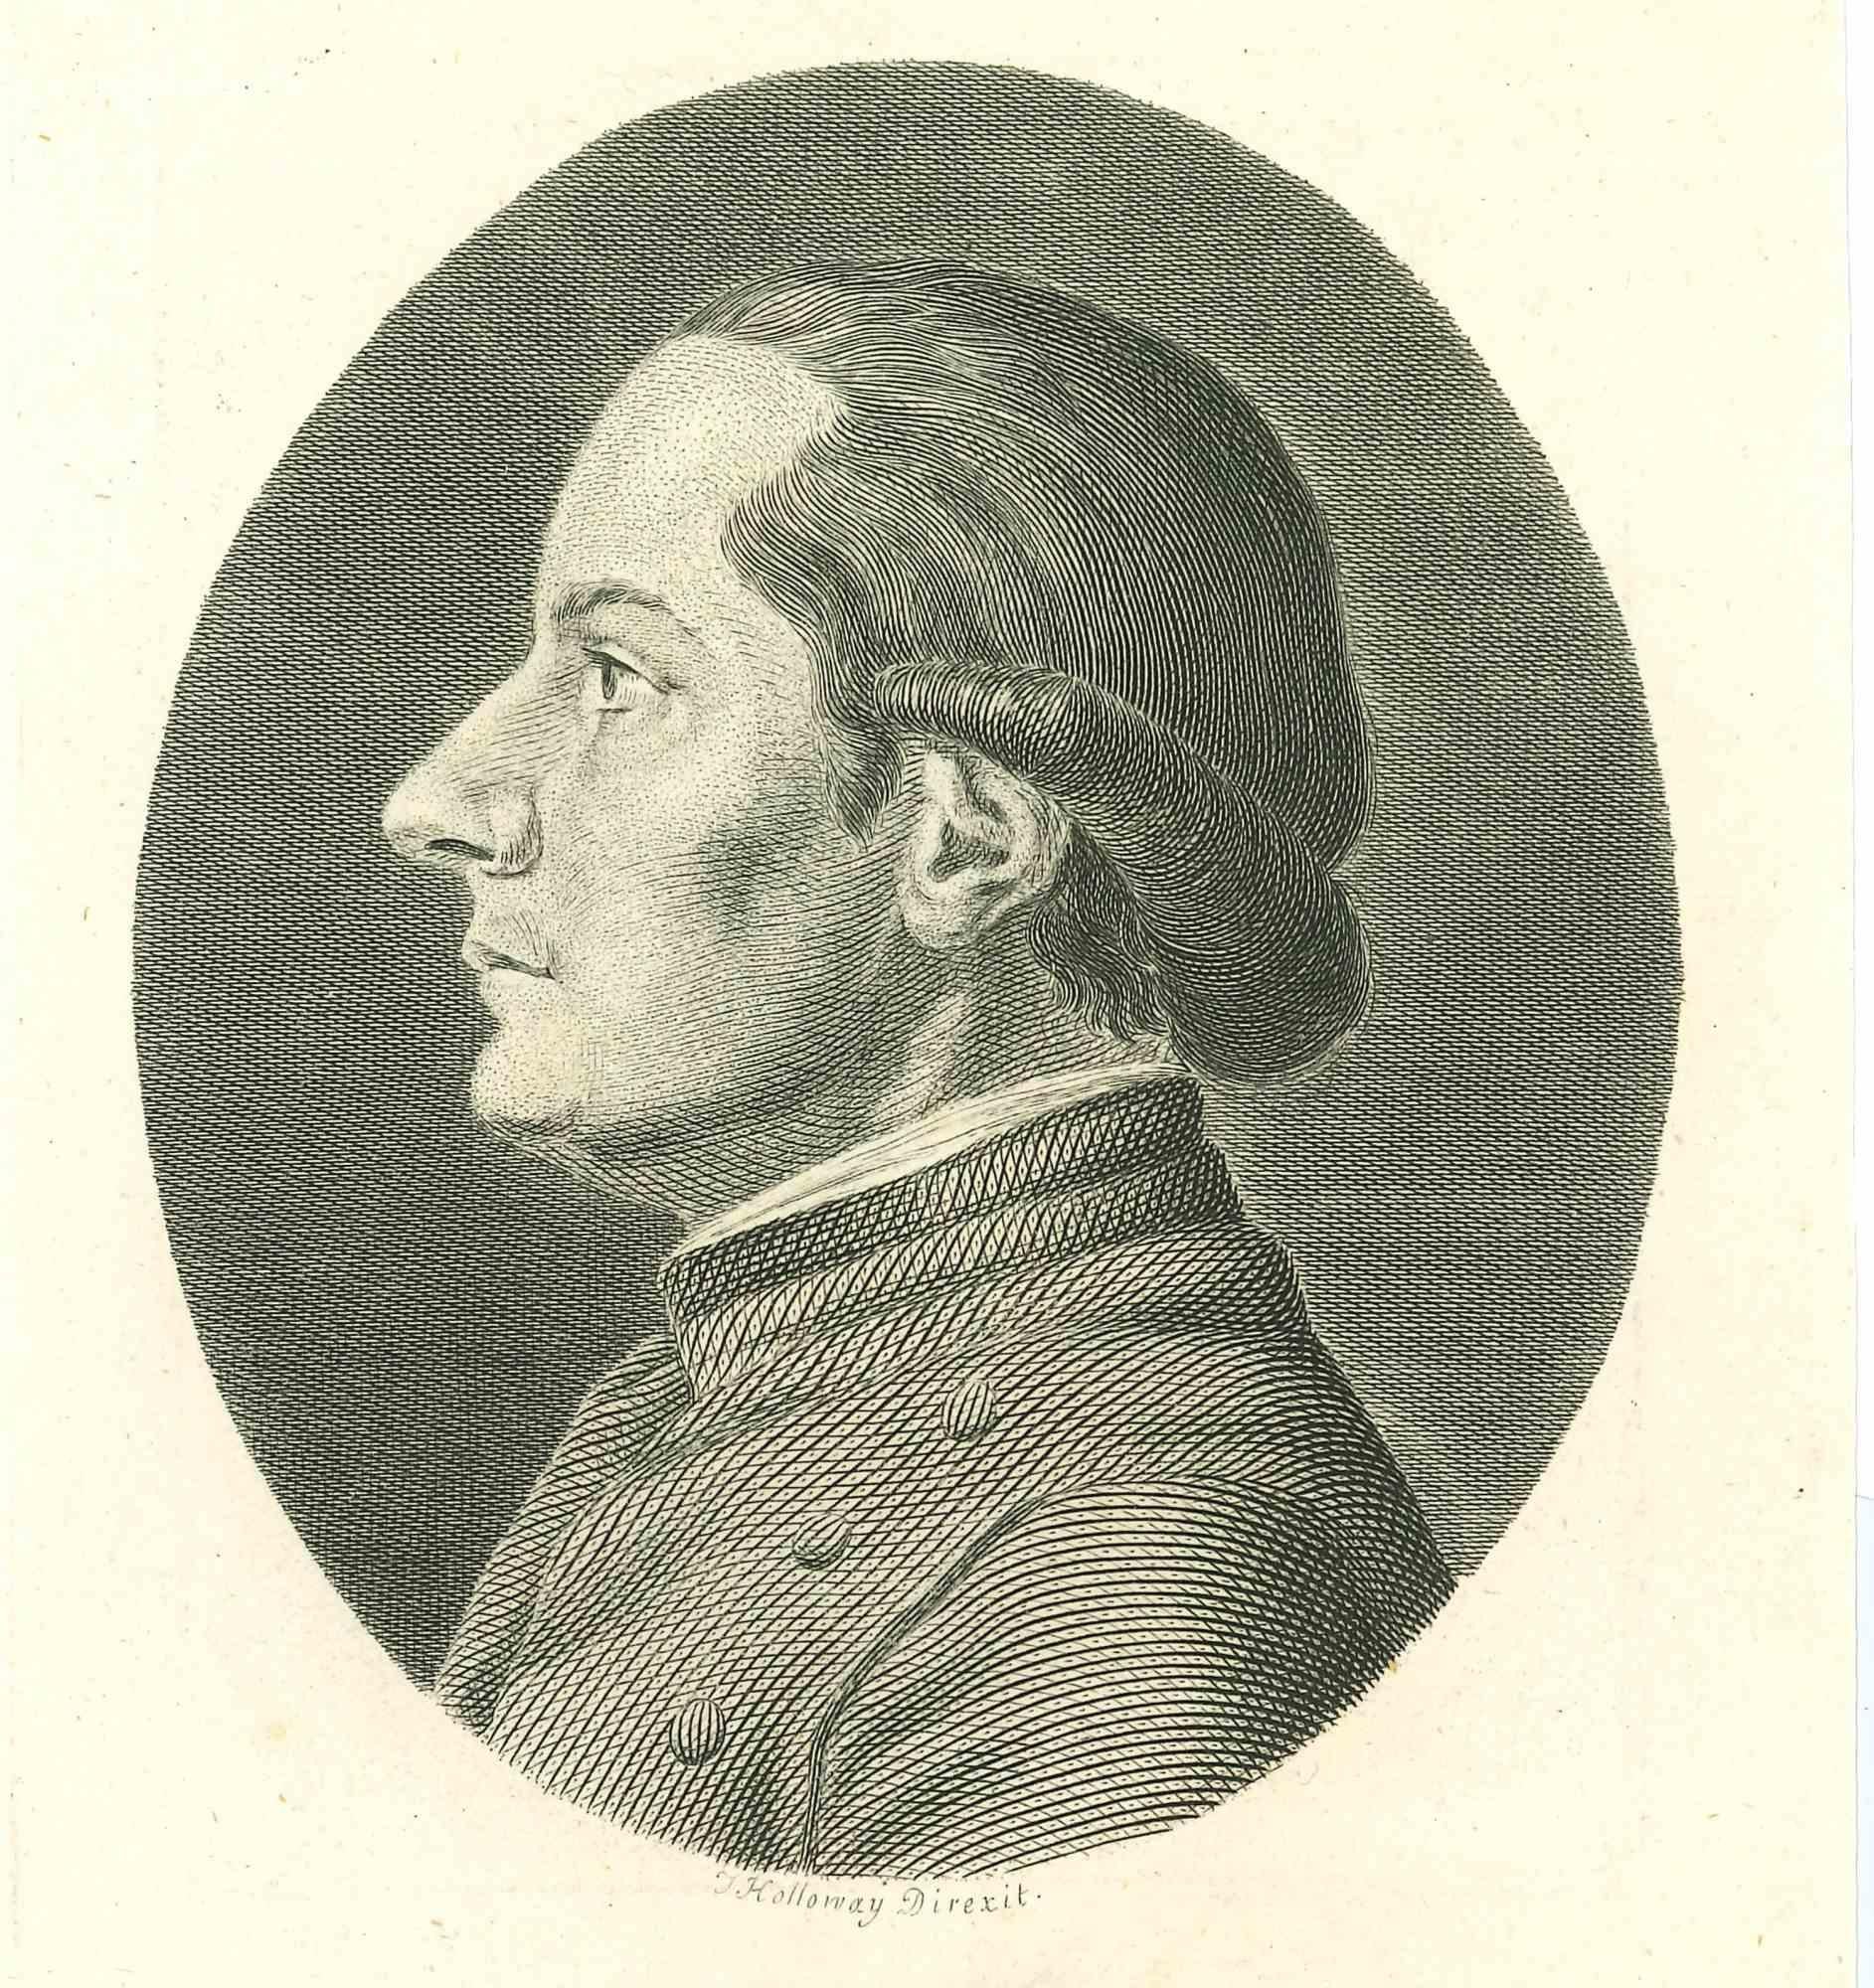 Portrait is an original artwork realized by Thomas Holloway (1748-1827).

Original Etching from Johann Caspar Lavater's "Essays on Physiognomy, Designed to promote the Knowledge and the Love of Mankind", London, Bensley, 1810. 

This artwork